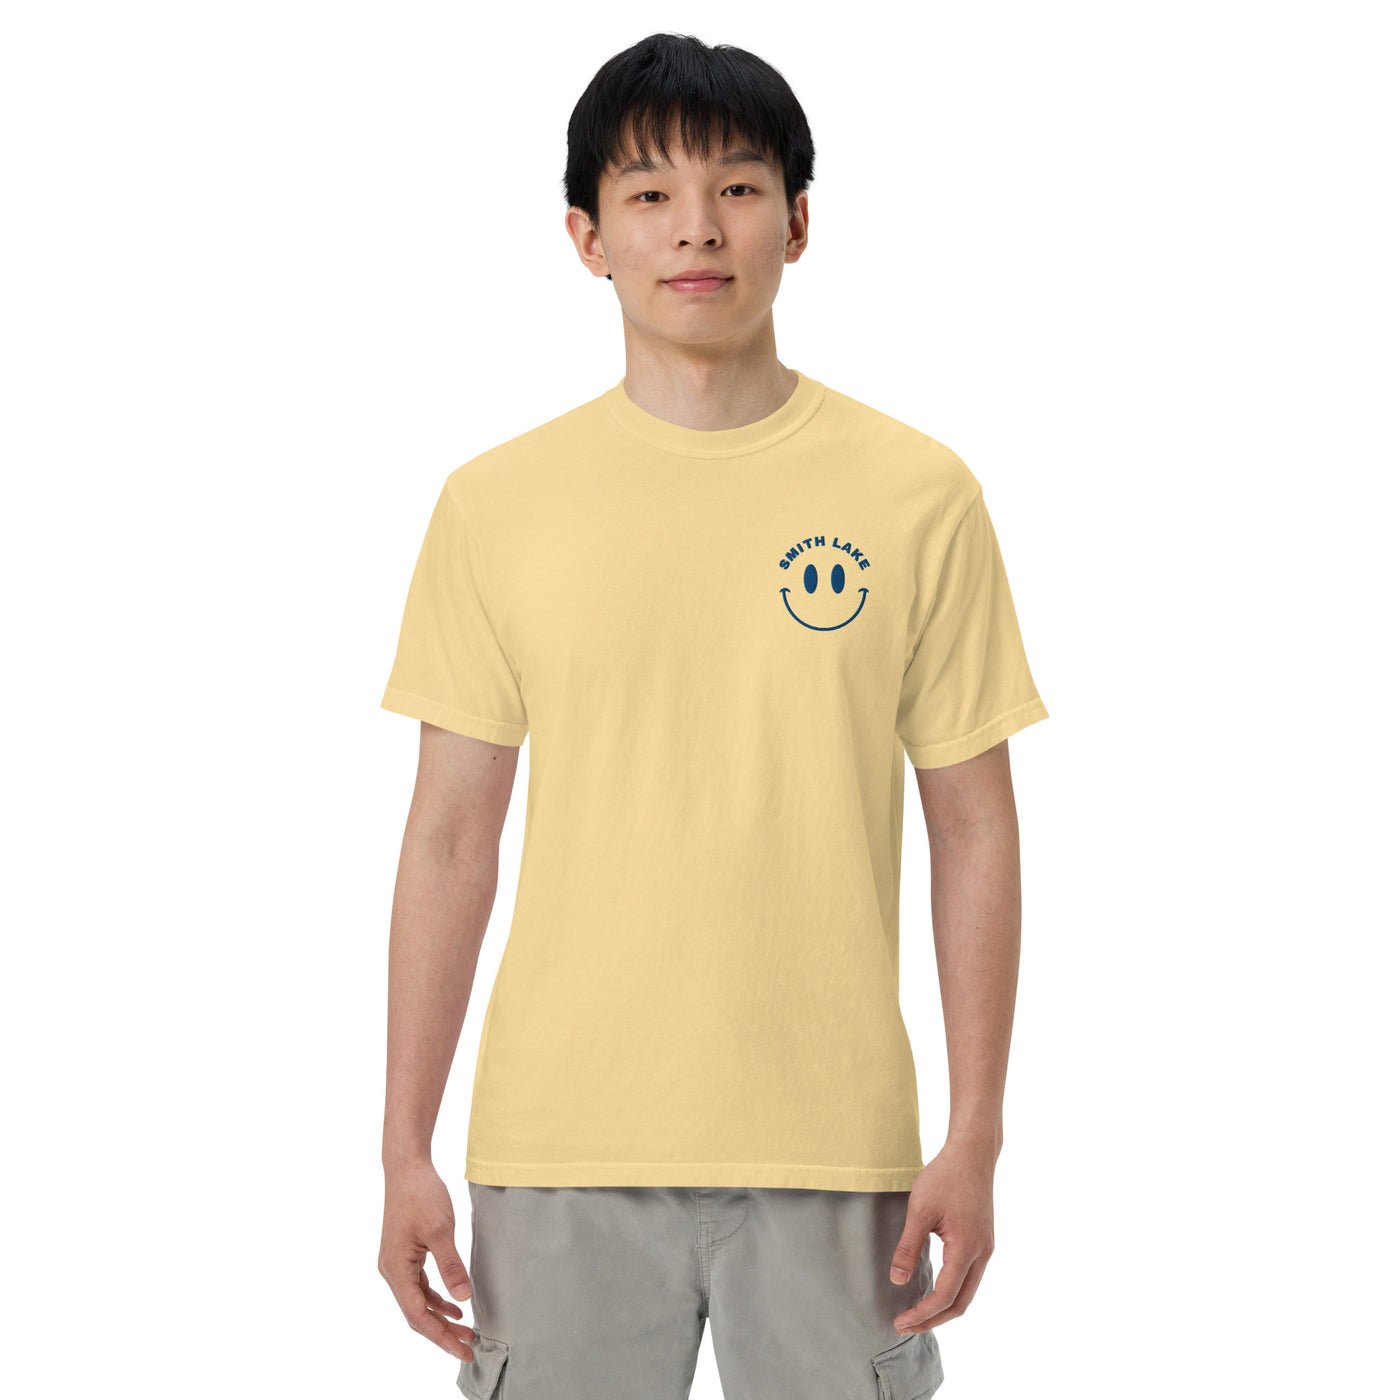 Smith Lake Embroidered T-Shirt T-Shirts Ezra's Clothing Butter S 